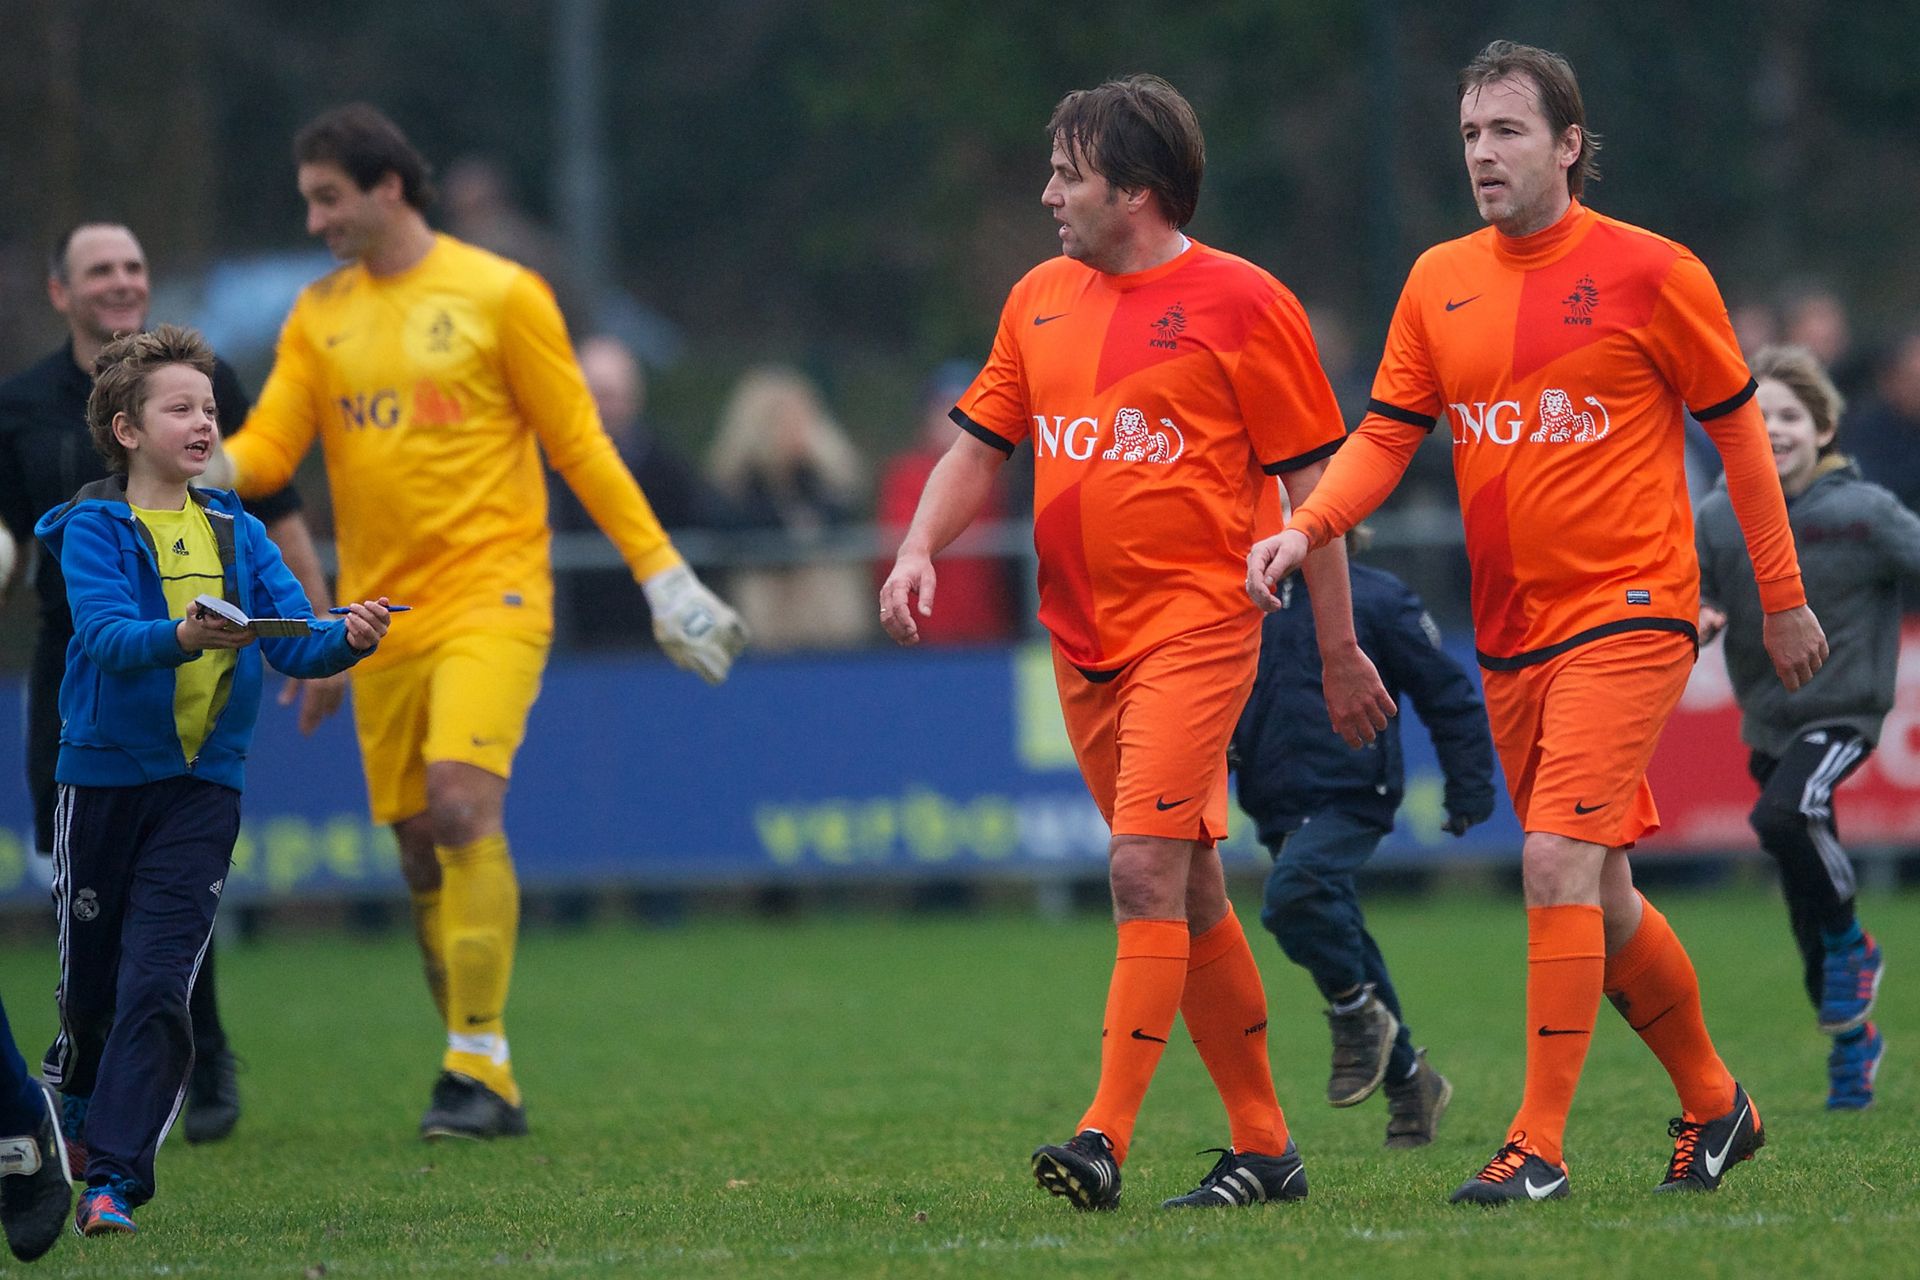 <p>                     Midfielders Rob and Richard Witschge came through the youth system at Ajax and both went on to represent the Netherlands at international level.                   </p>                                      <p>                     Rob, the older of the two, won 30 caps and went on to play for Saint-Etienne and Feyenoord. Richard appeared 31 times for the Oranje and had a spell at Barcelona under Johan Cruyff.                   </p>